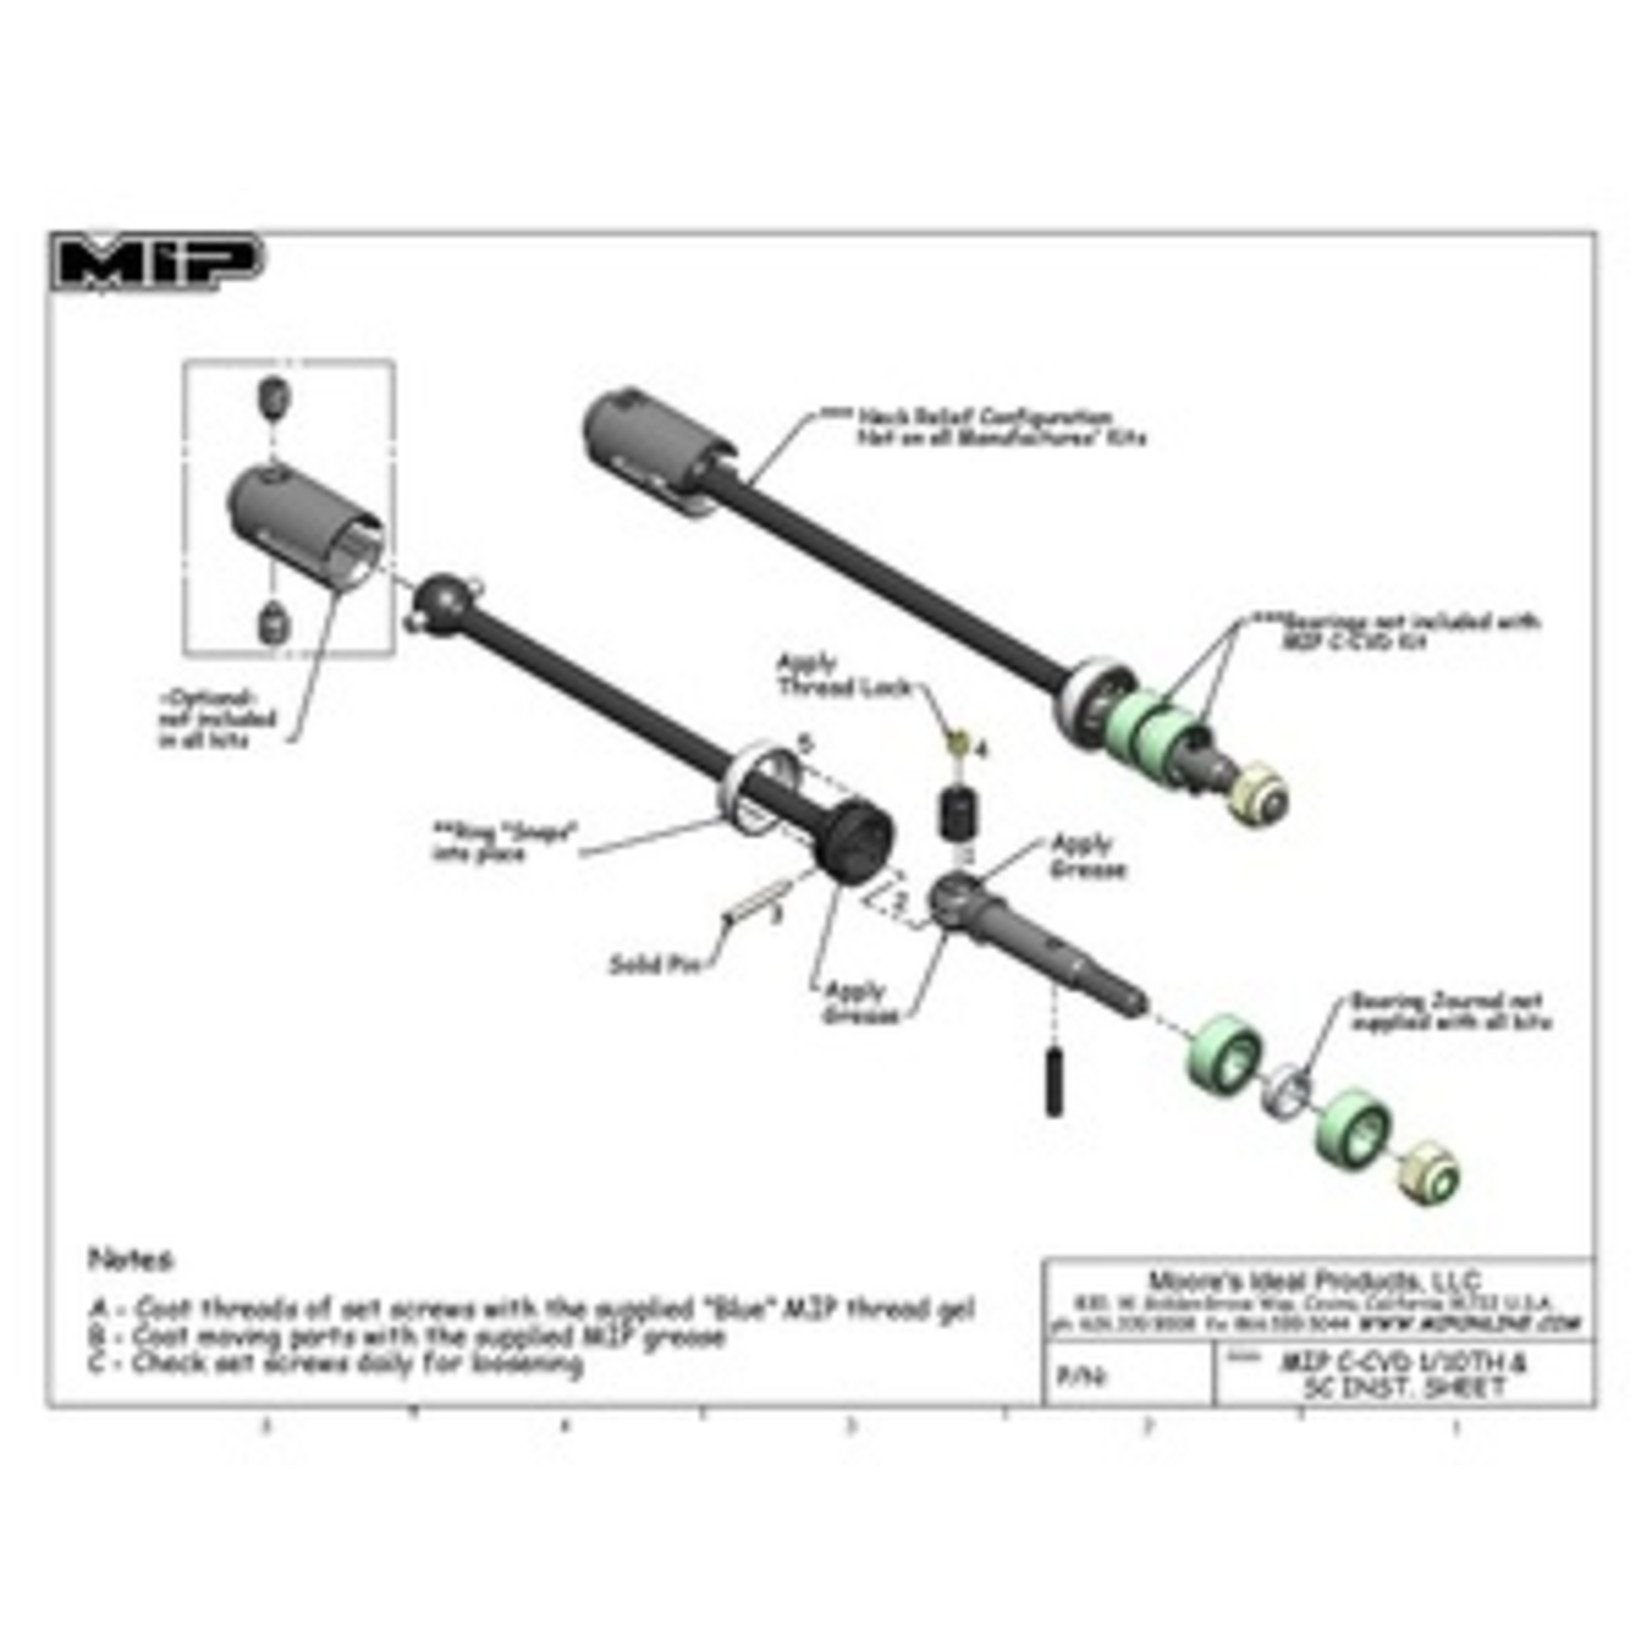 MIP - Moore's Ideal Products MIP8106  C-CVD Kit for Slash/Nitro Rustler and Stampede